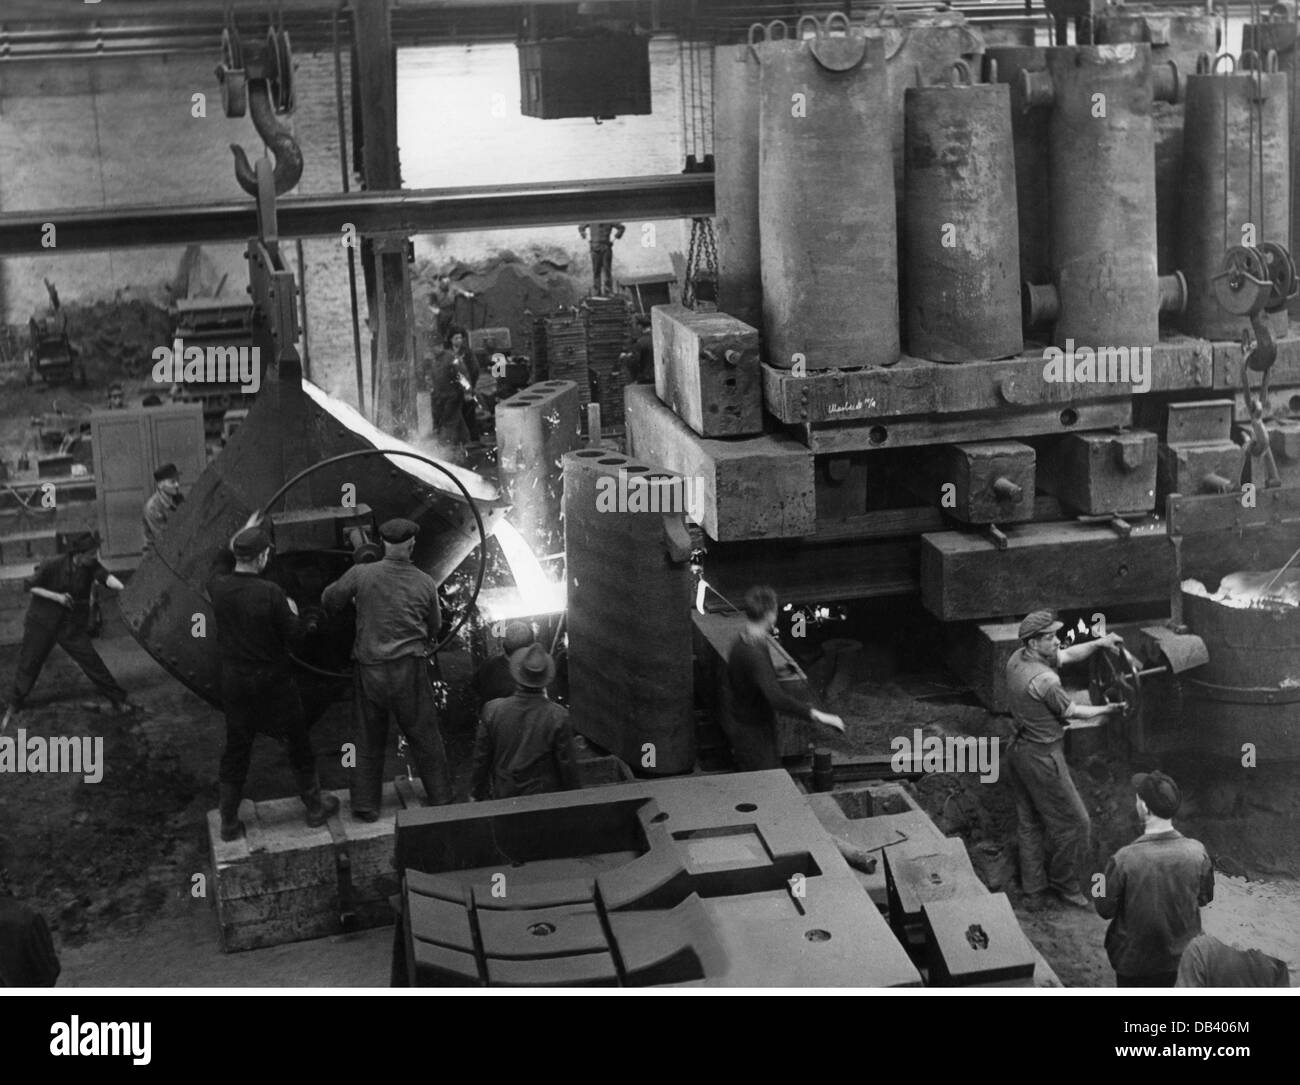 Industrie, Metall, Gießerei, Meer AG, Mönchengladbach, 1950er Jahre, Additional-Rights-Clearences-not available Stockfoto